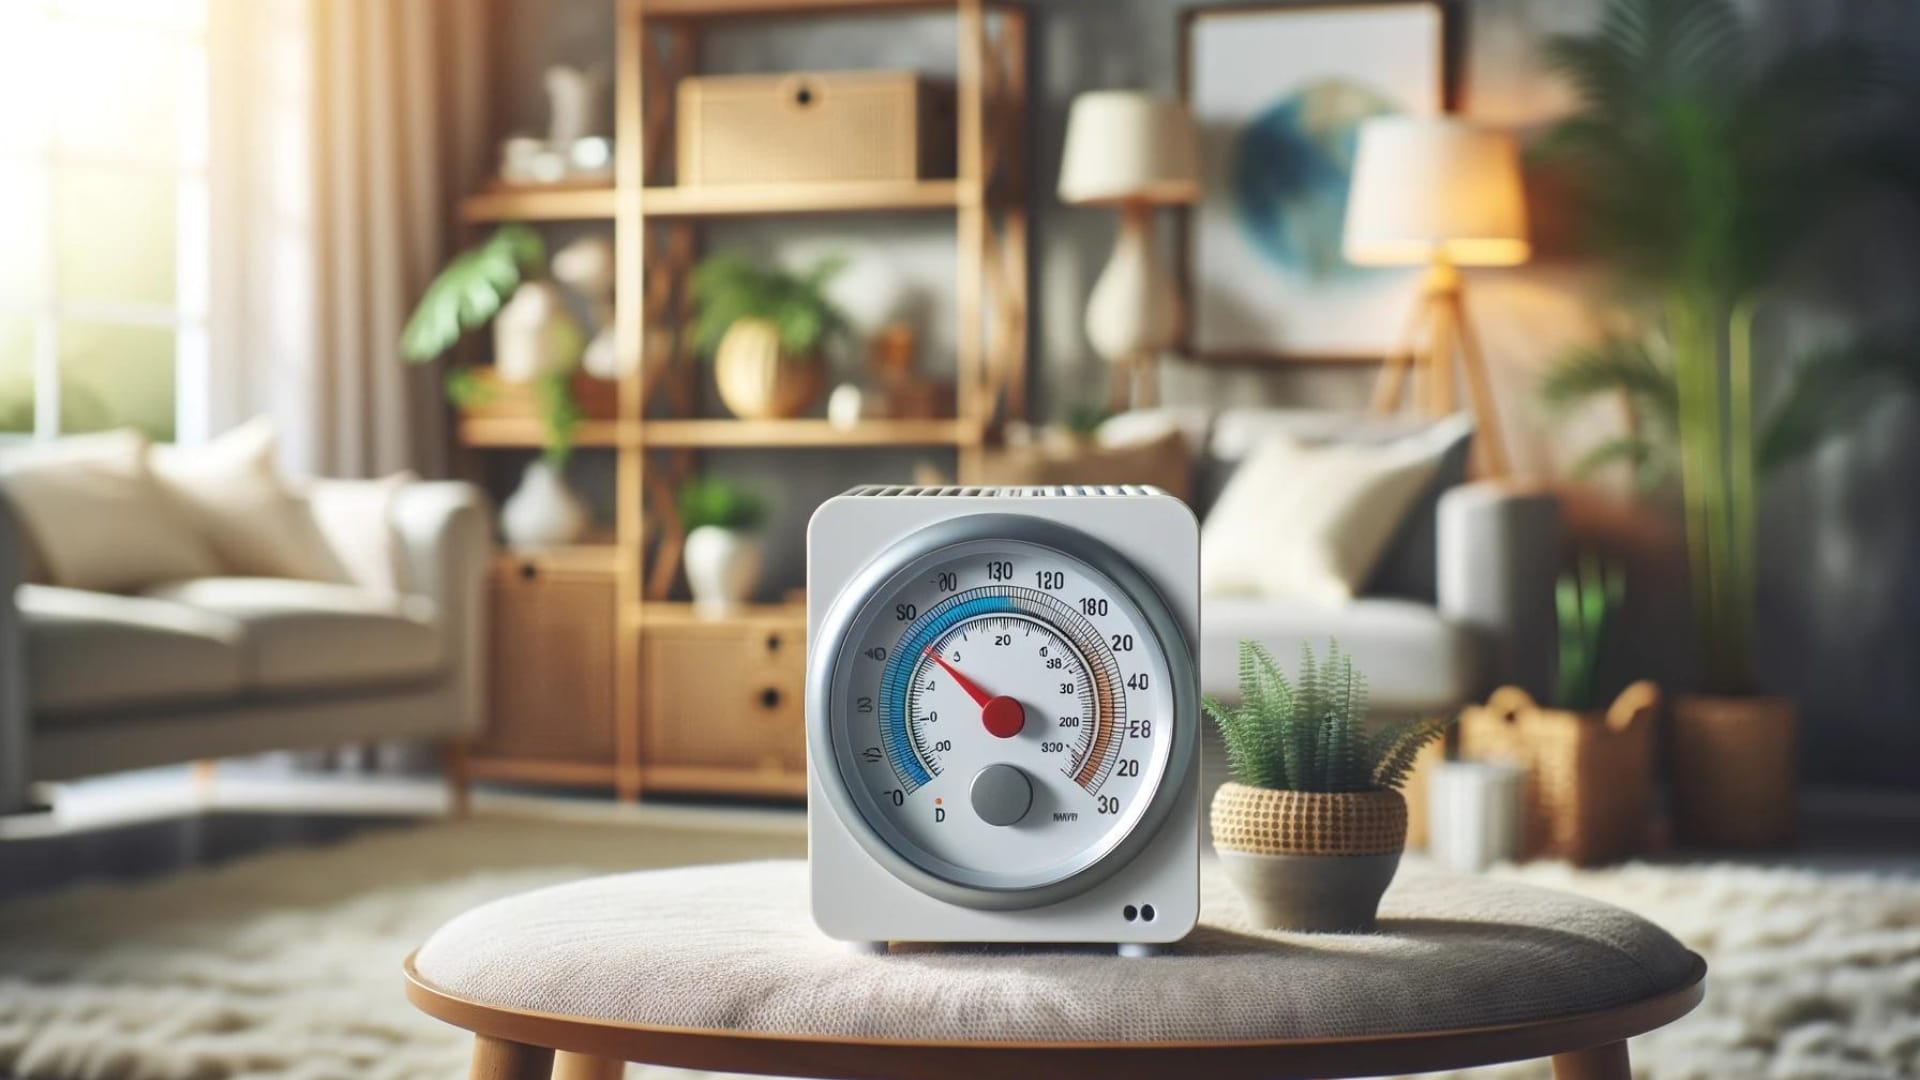 A cozy, home interior setting with a hygrometer prominently displayed, showing a balanced humidity level.